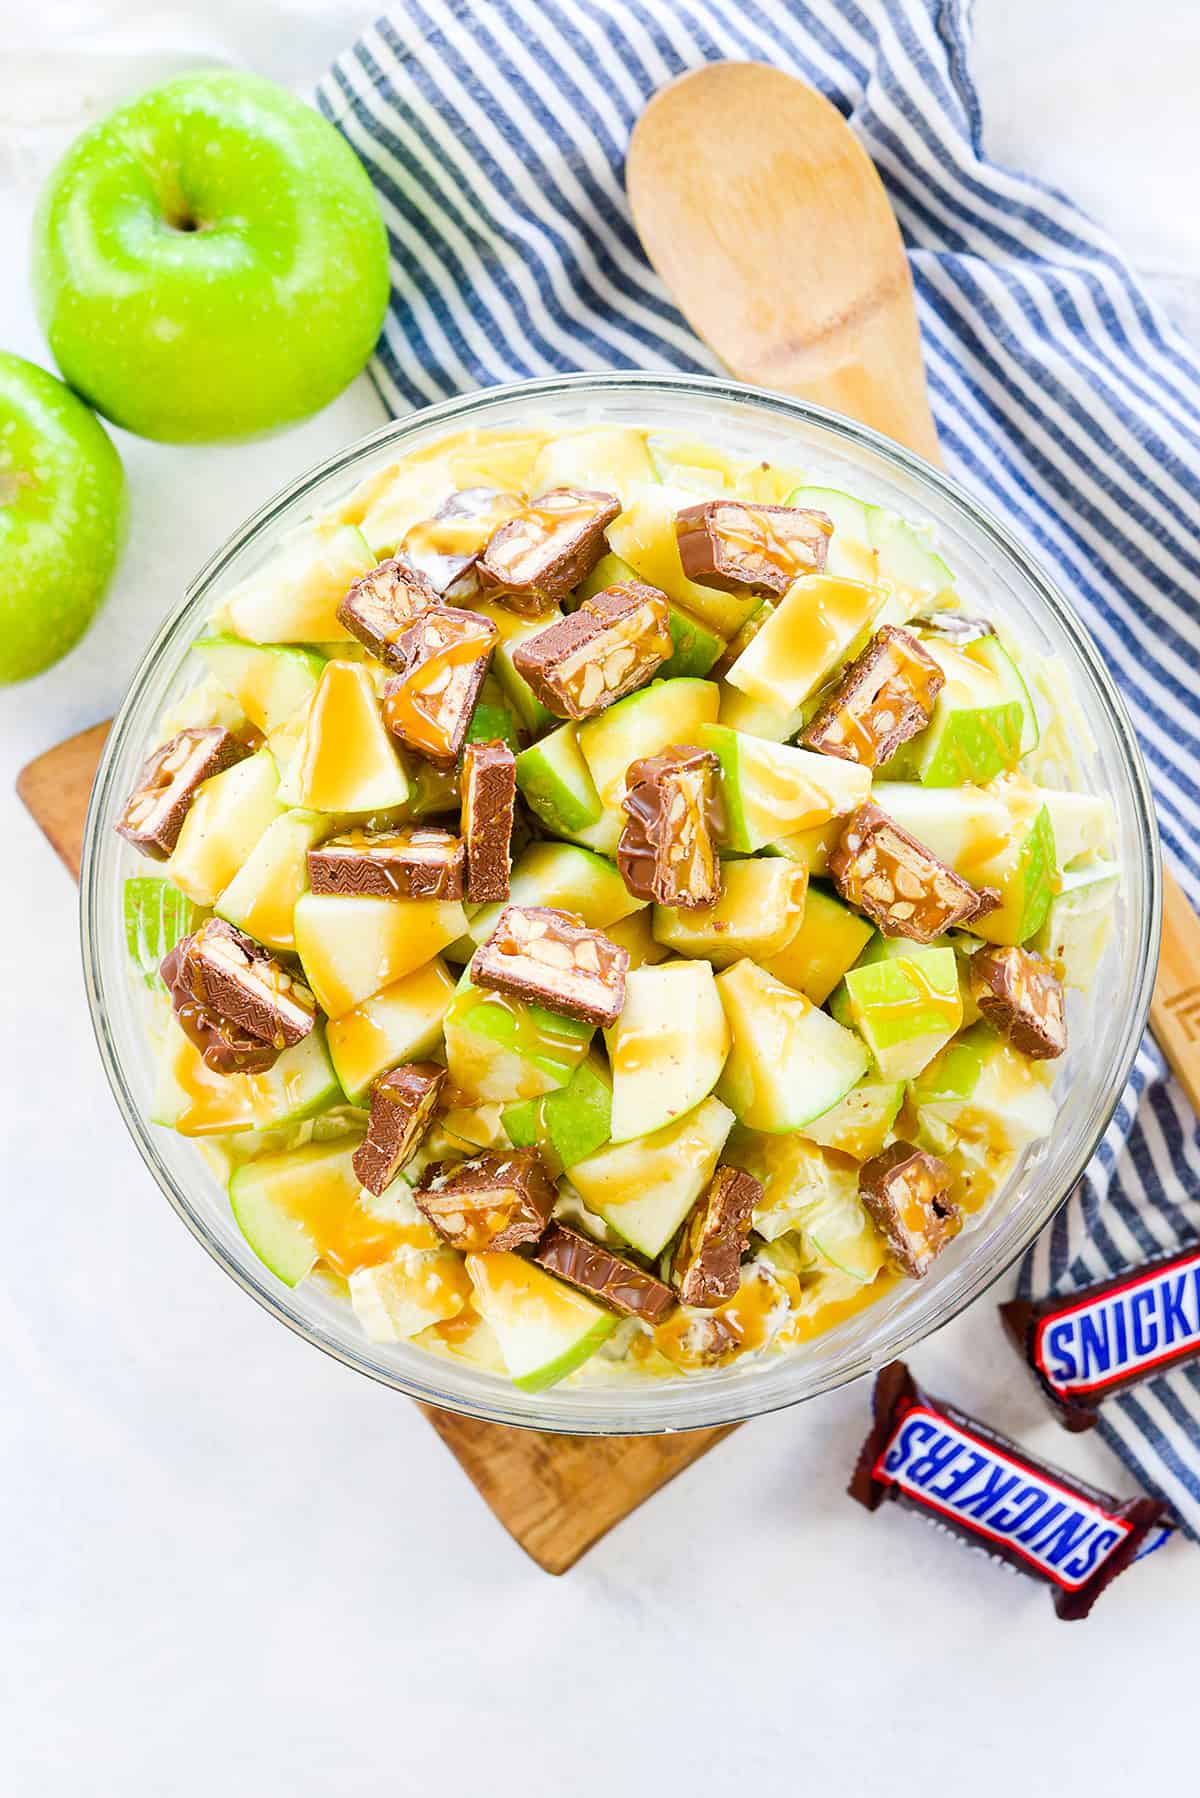 Mixing bowl full of snicker salad.